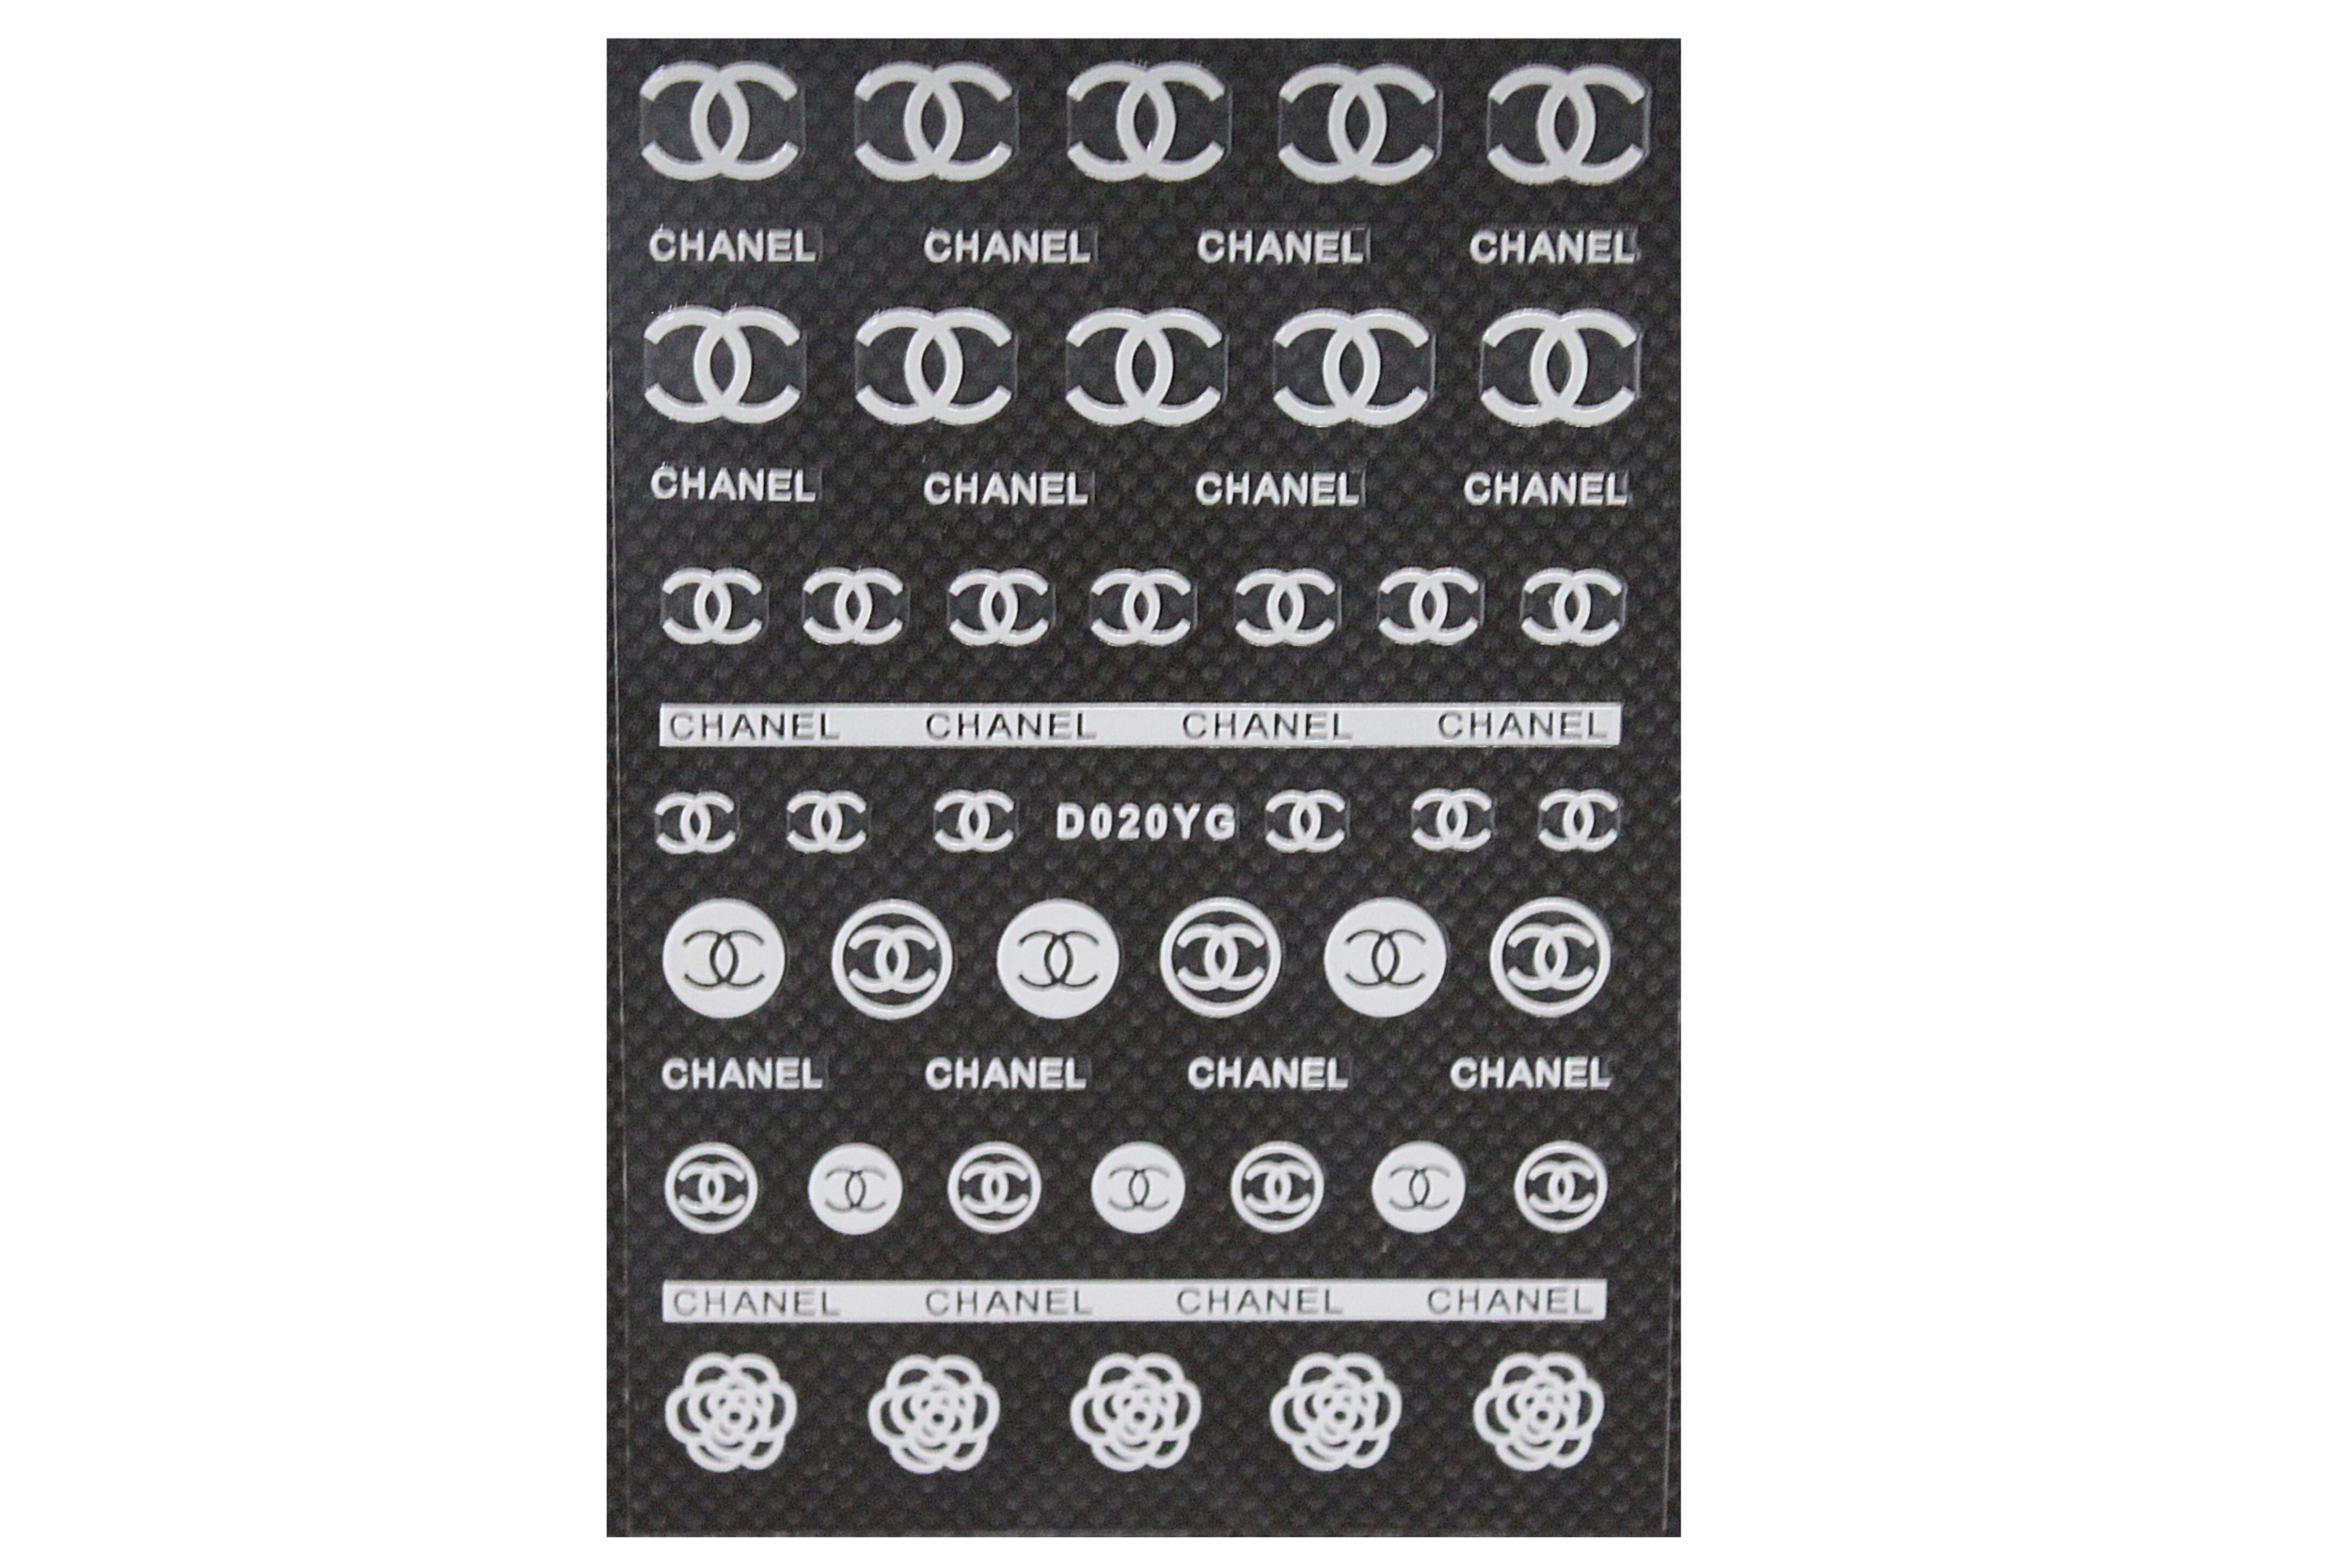  Chanel Nail Stickers